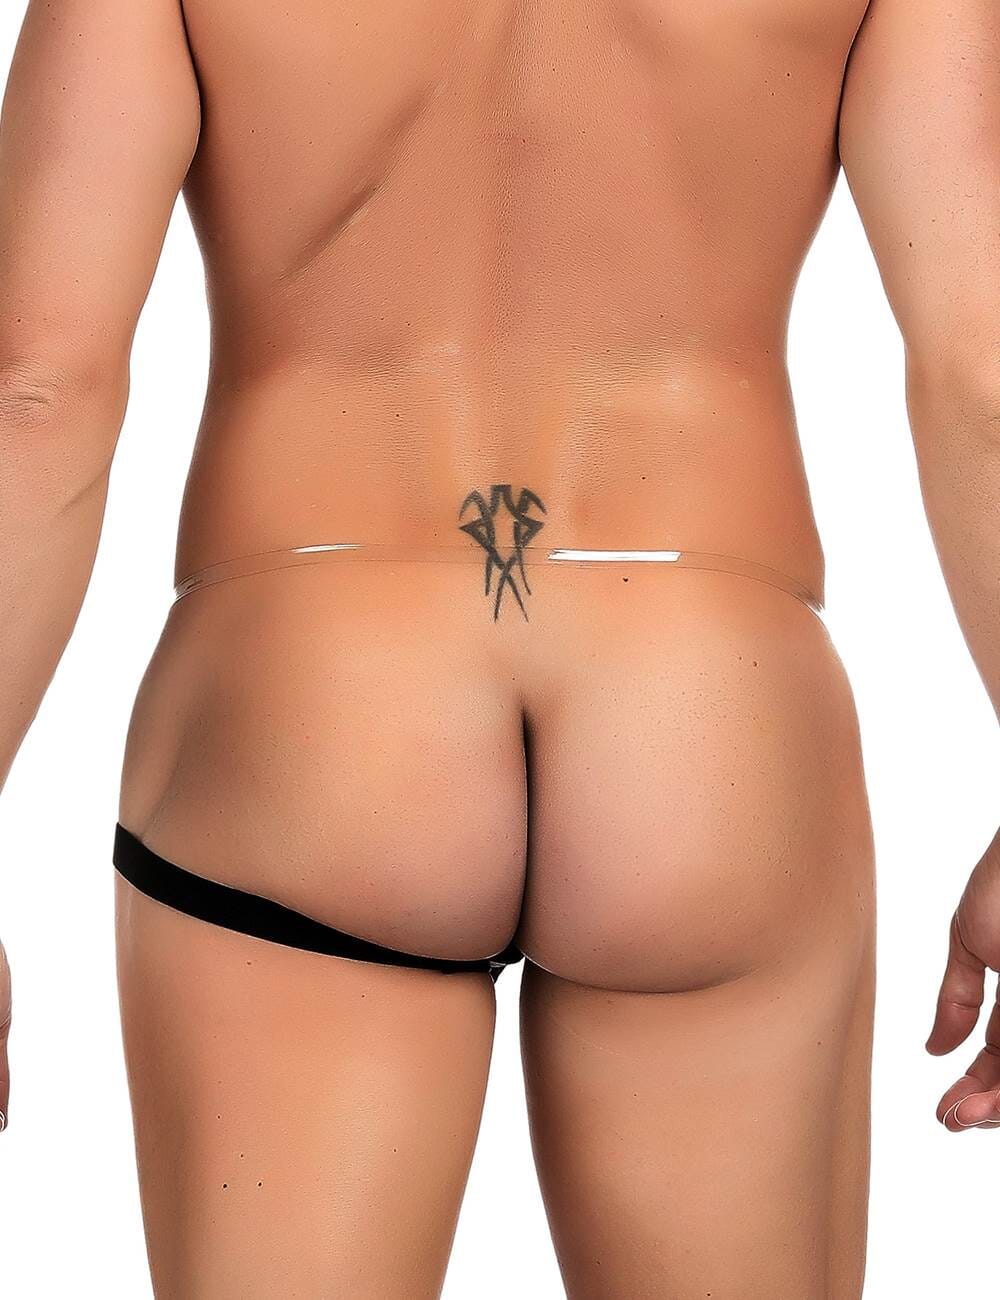 Scandals Wet Look Illusion Thong For Men Menswear Scandals Lingerie 